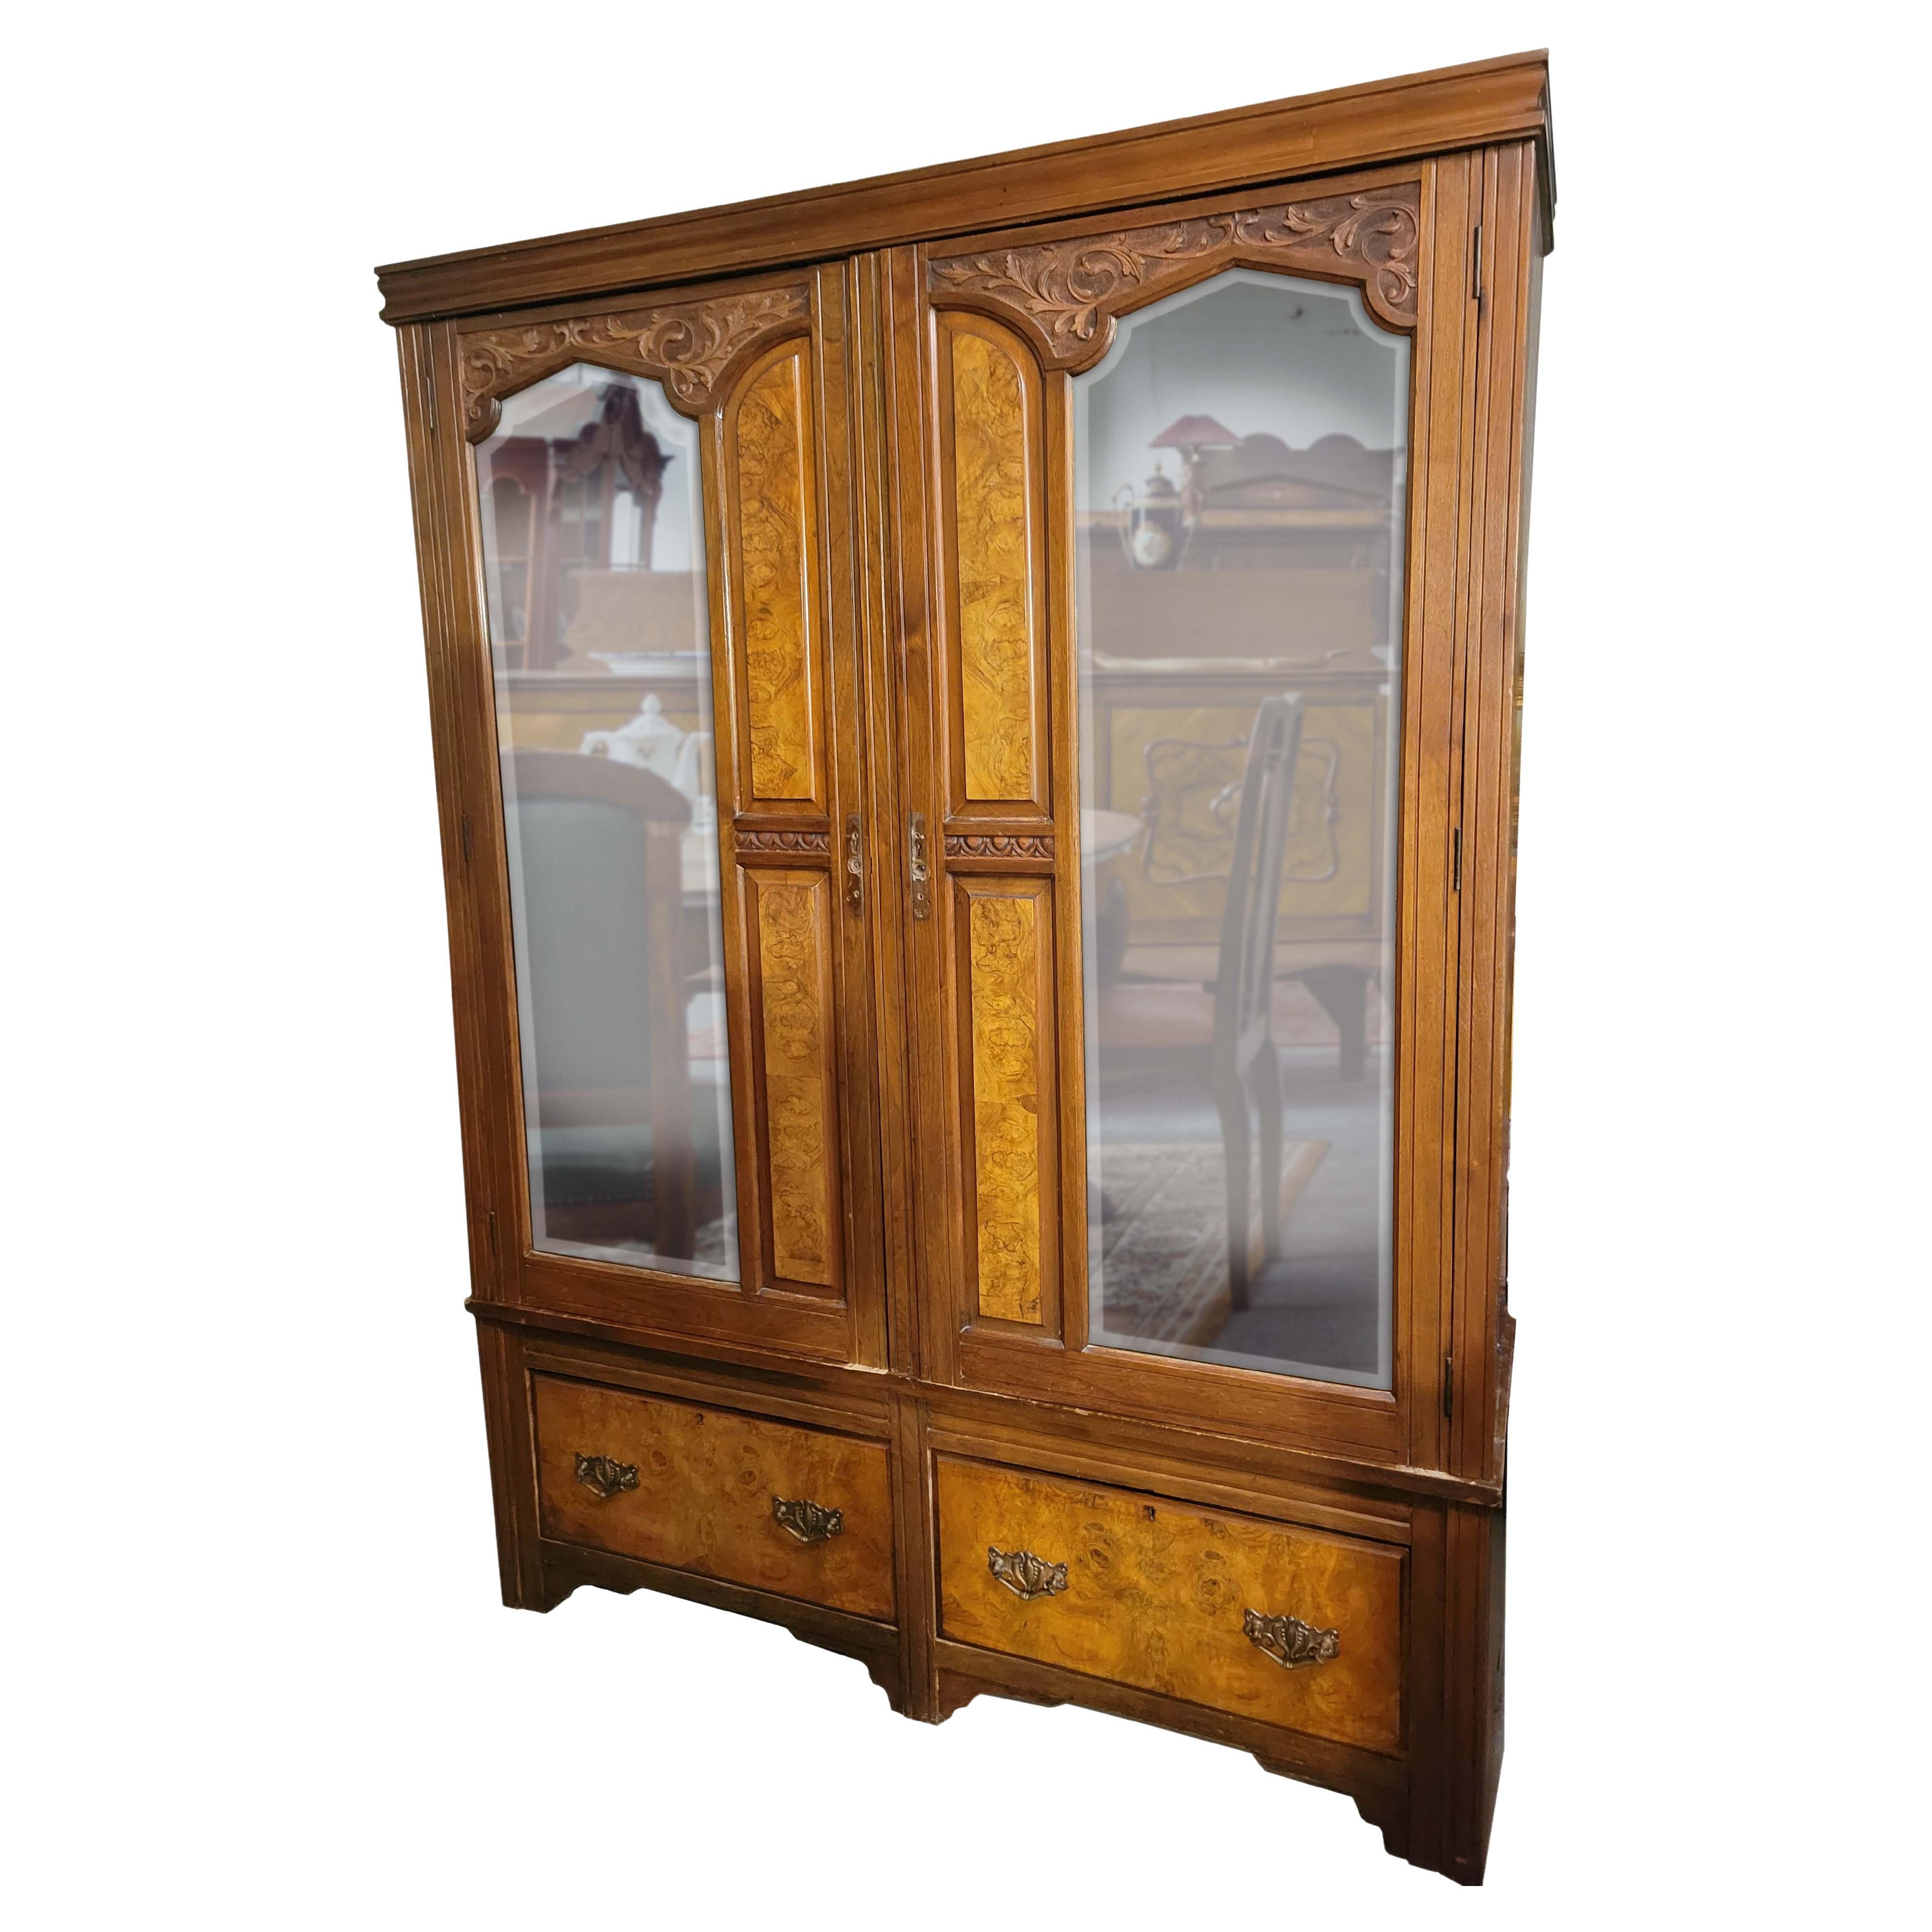 Antique British Wardrobe with Beveled Mirrors by H. Murray and Co. For Sale